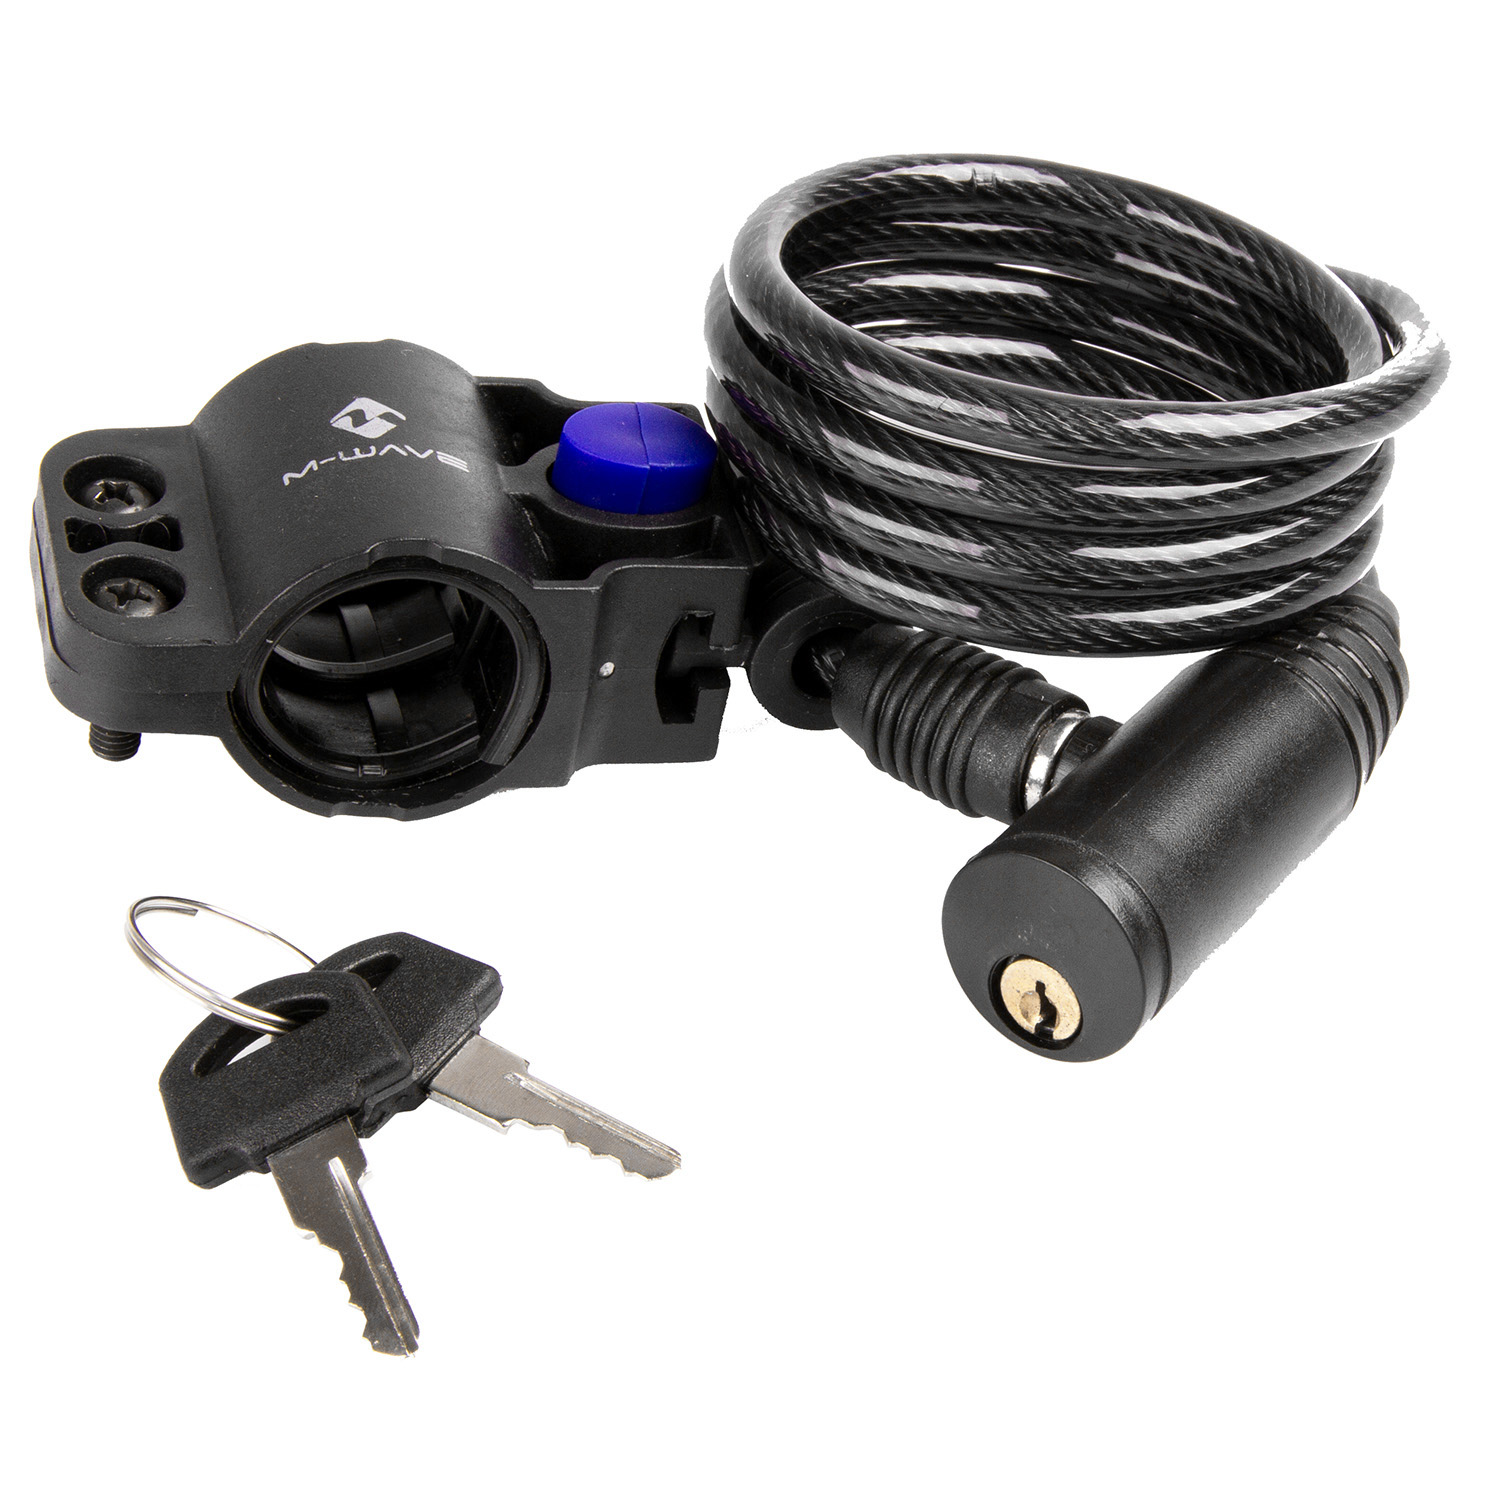 233822 M-WAVE S 6.10 spiral cable lock- AVAILABLE IN SELECTED BIKE SHOPS